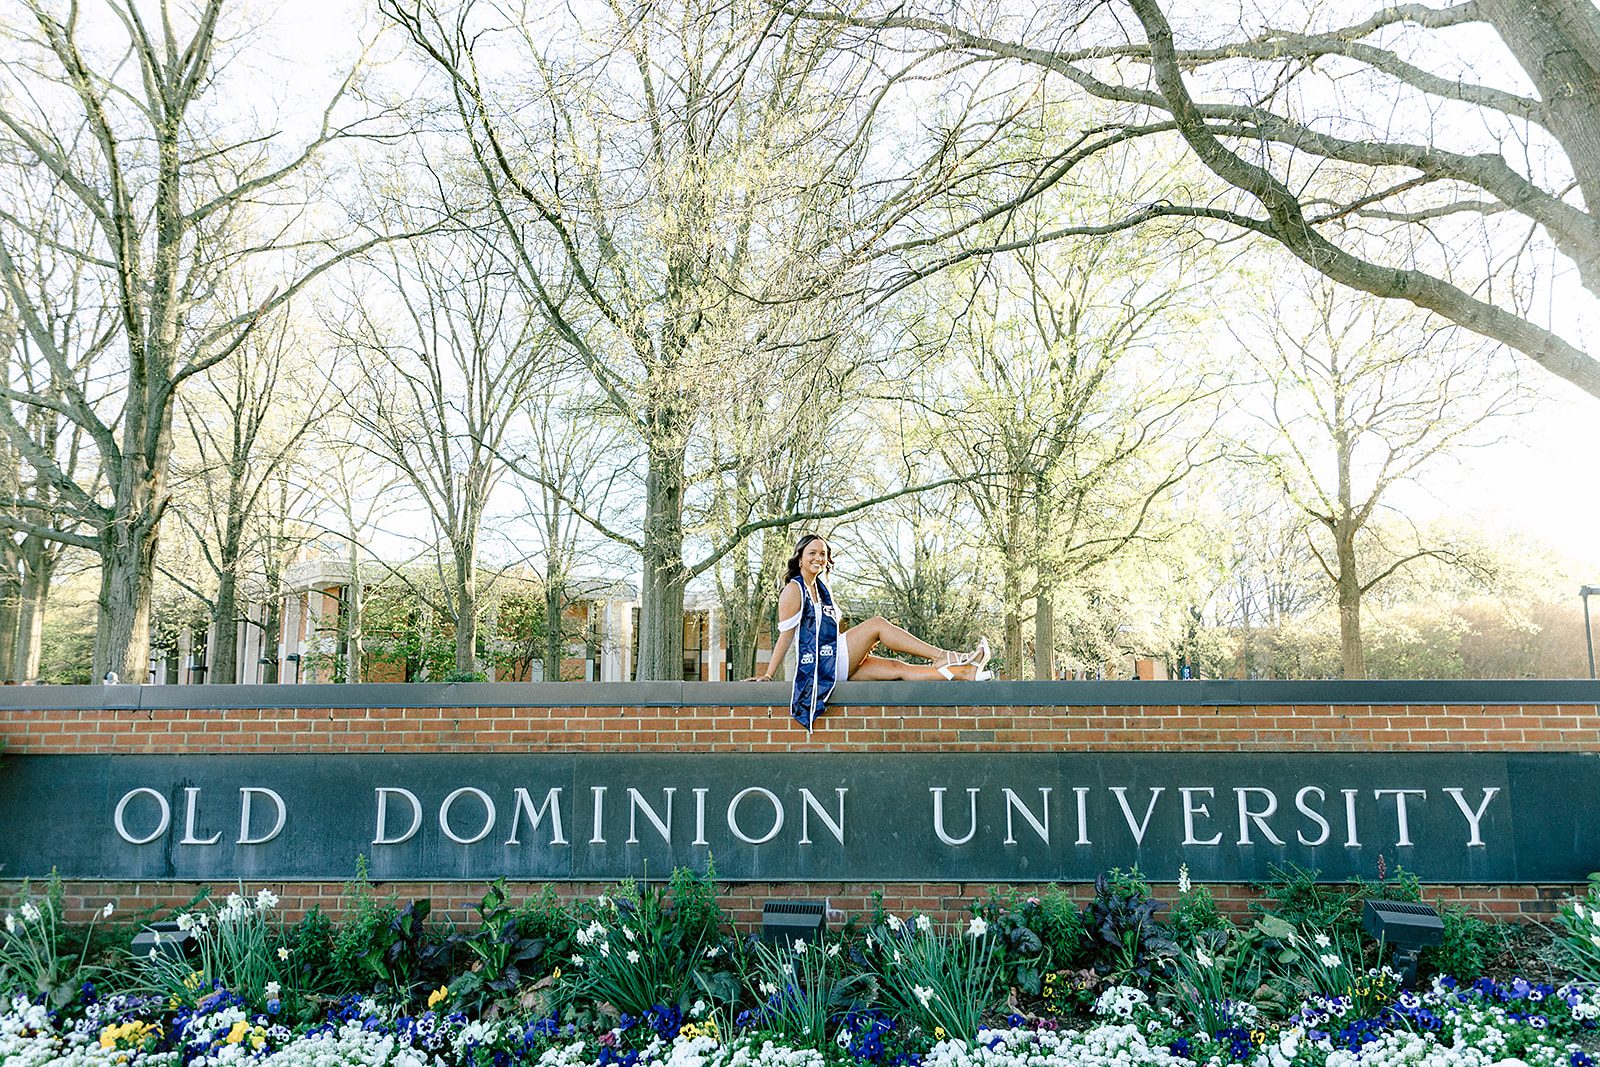 Young Woman sitting on the brick above Old Dominion University Campus Sign